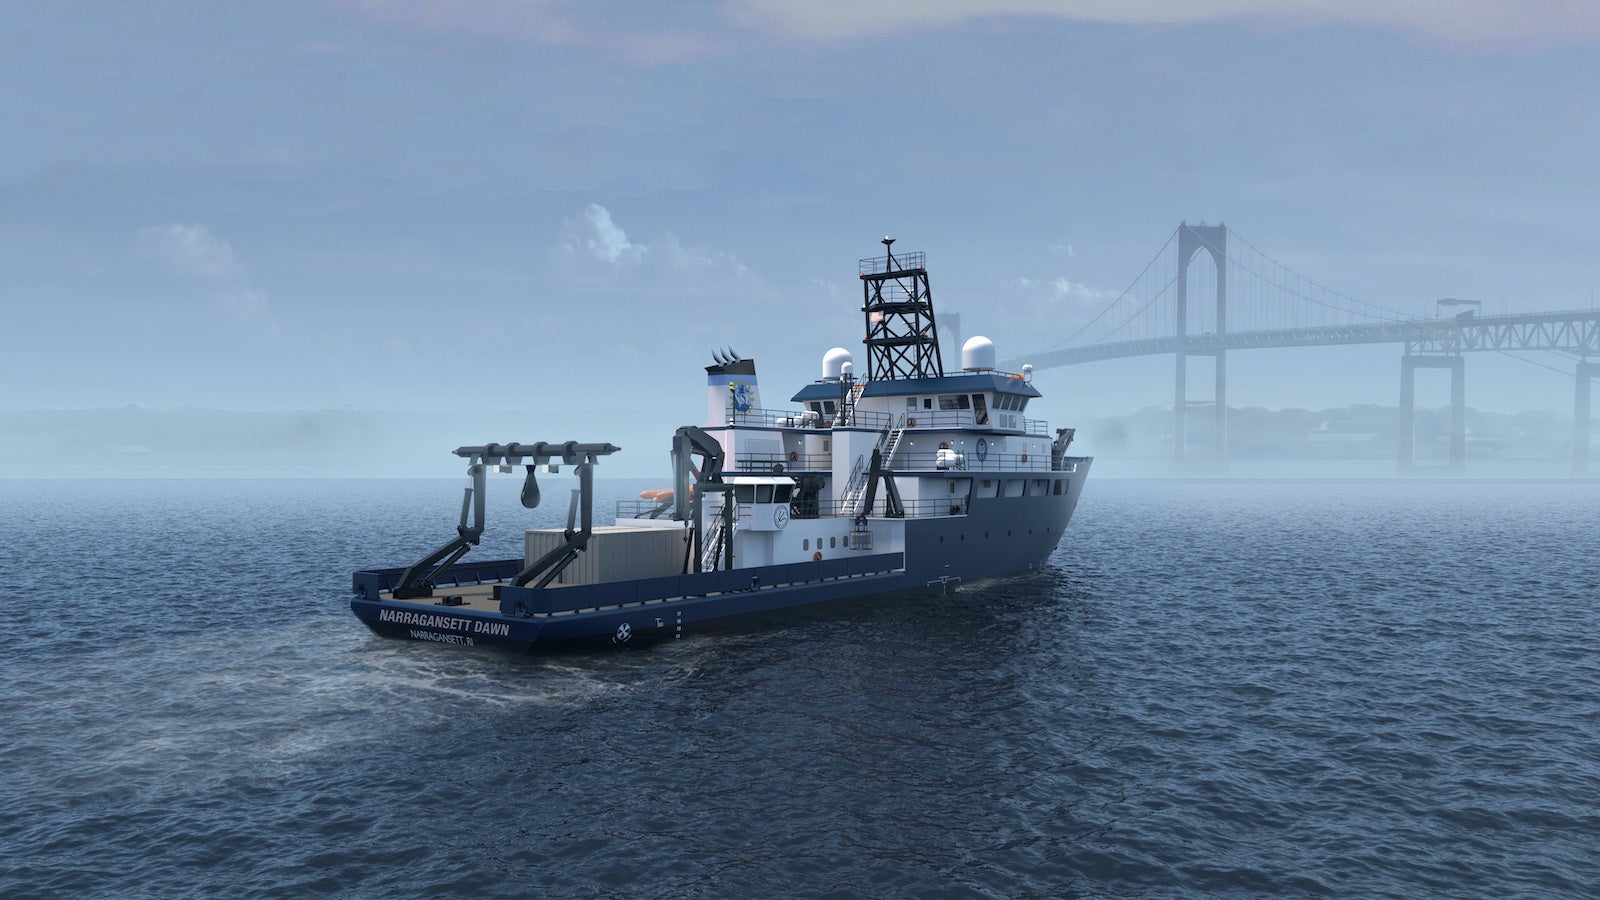 A realistic drawing on a blue and white research ship in teh water heading towards a high bridge. THe Stern of teh ship has he name “Narragansett Dawn” printed on it.